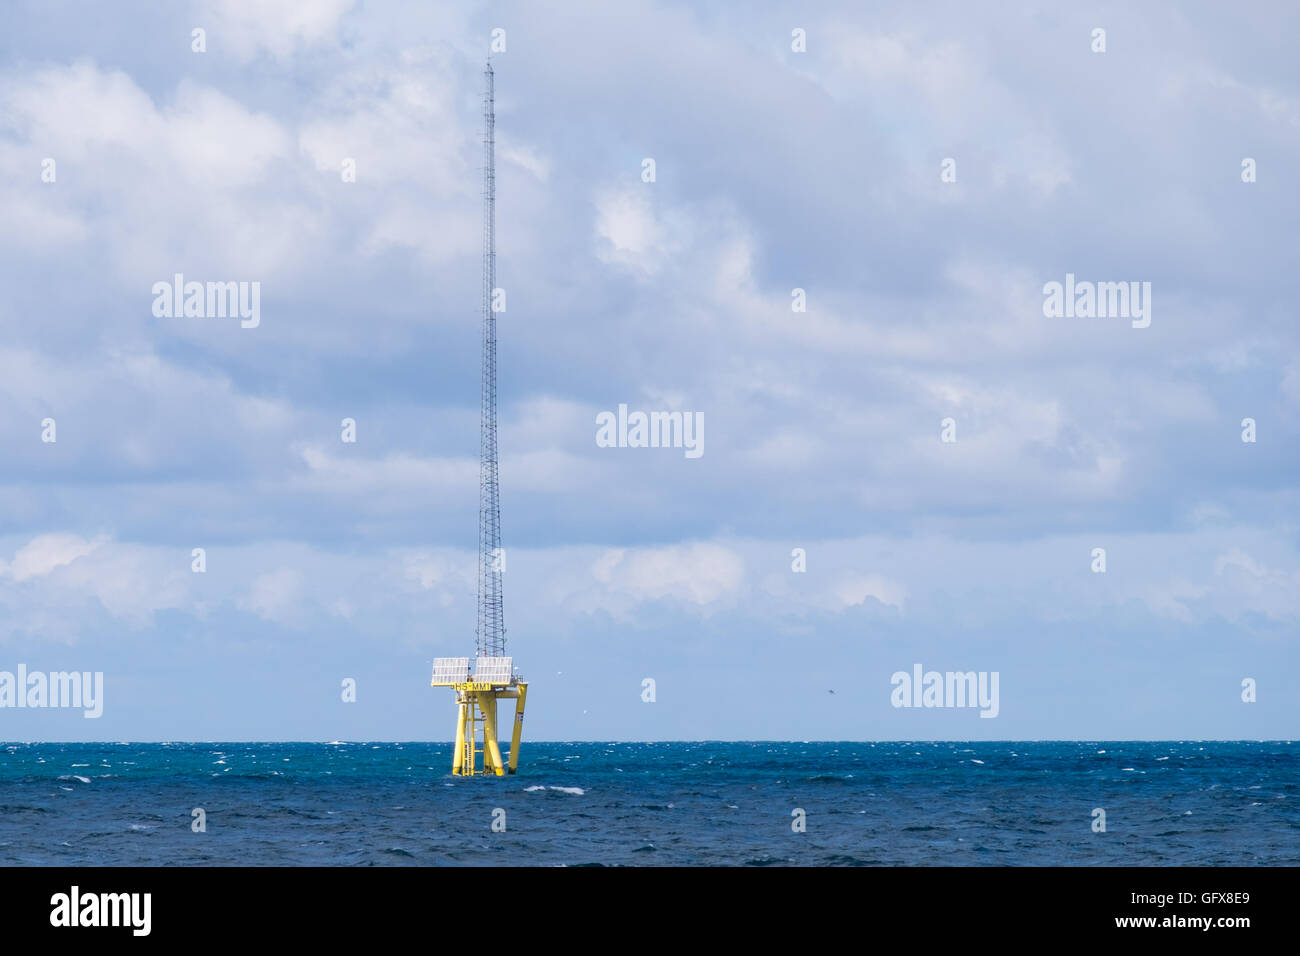 The Met Mast on Hornsea Offshore Wind Farm Project One, North Sea, UK Stock Photo